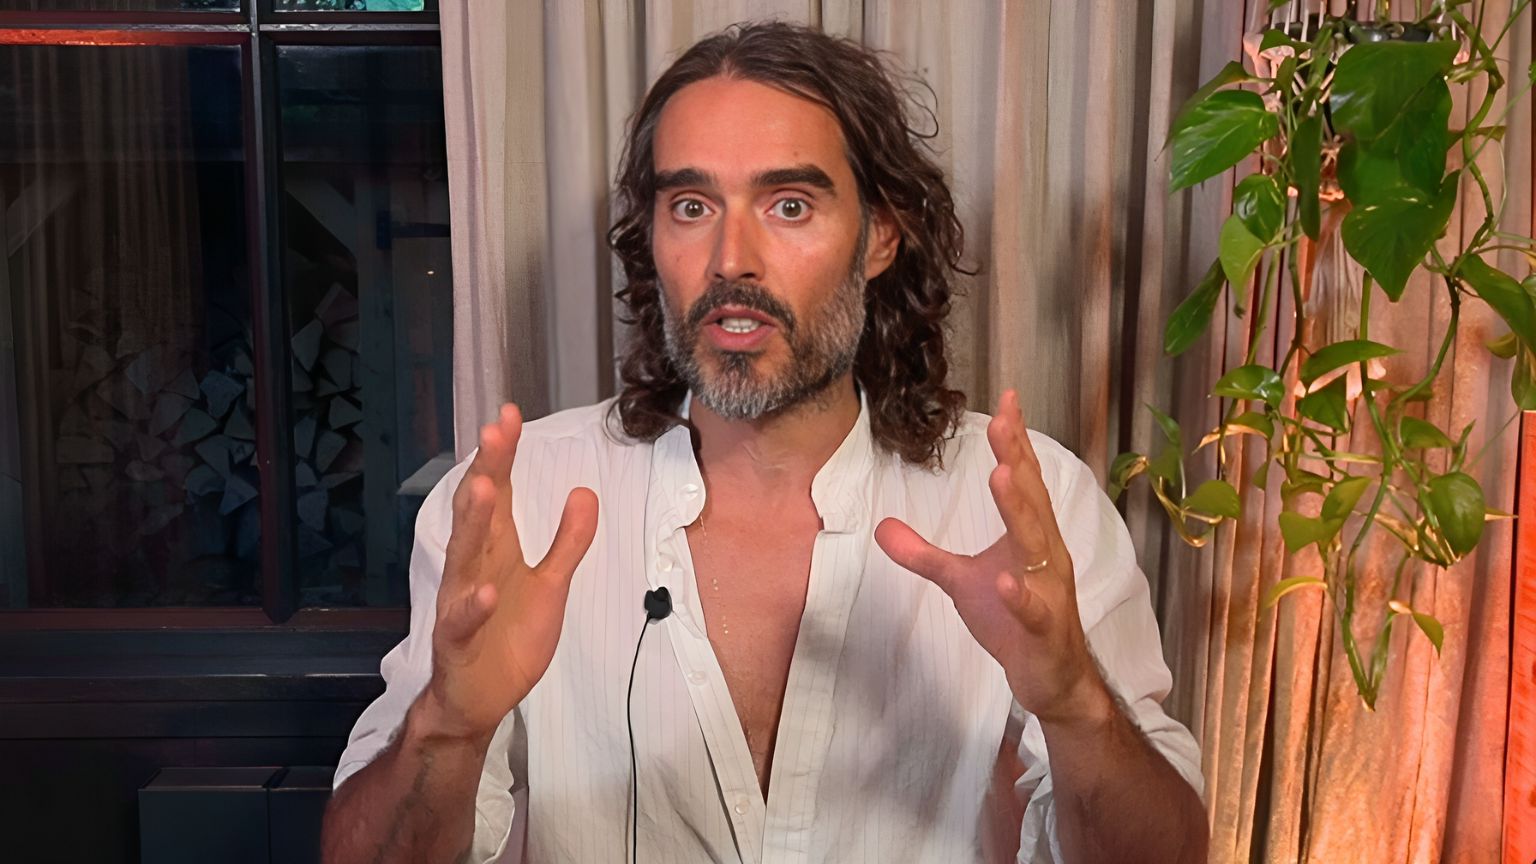 Some Companies Pull Advertising From Rumble For Its Neutral Stance on Russell Brand